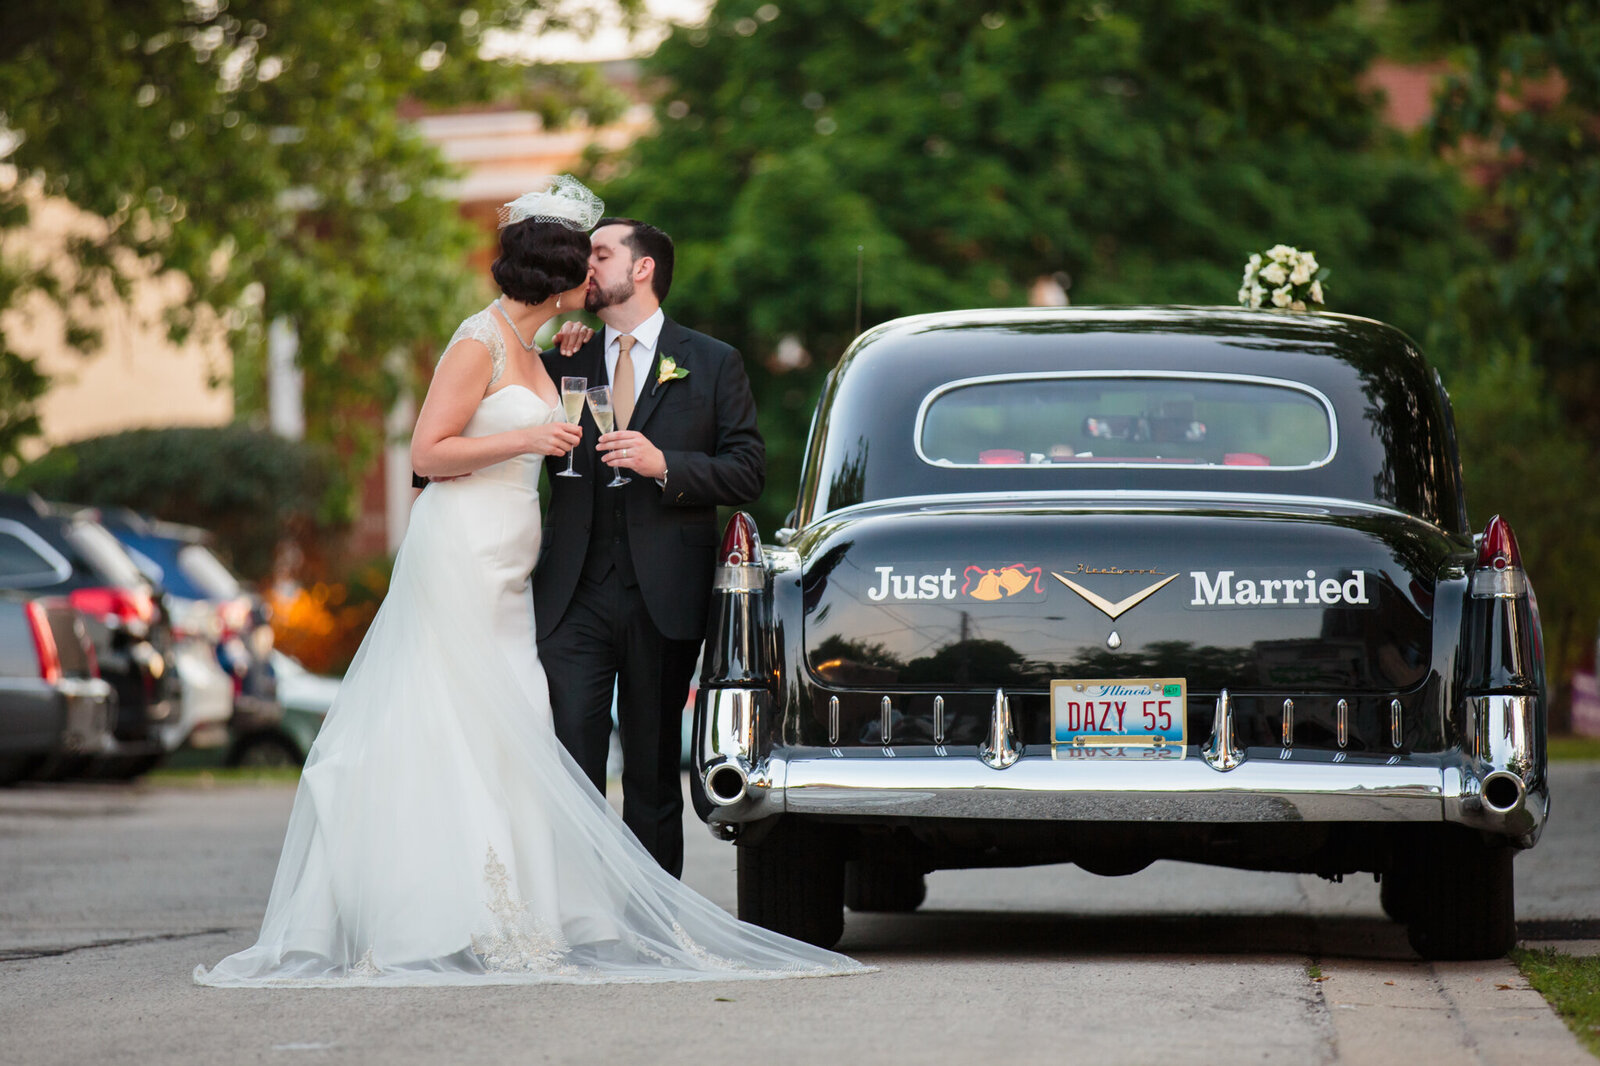 Bride and groom kiss next to vintage car that reads, "Just Married"